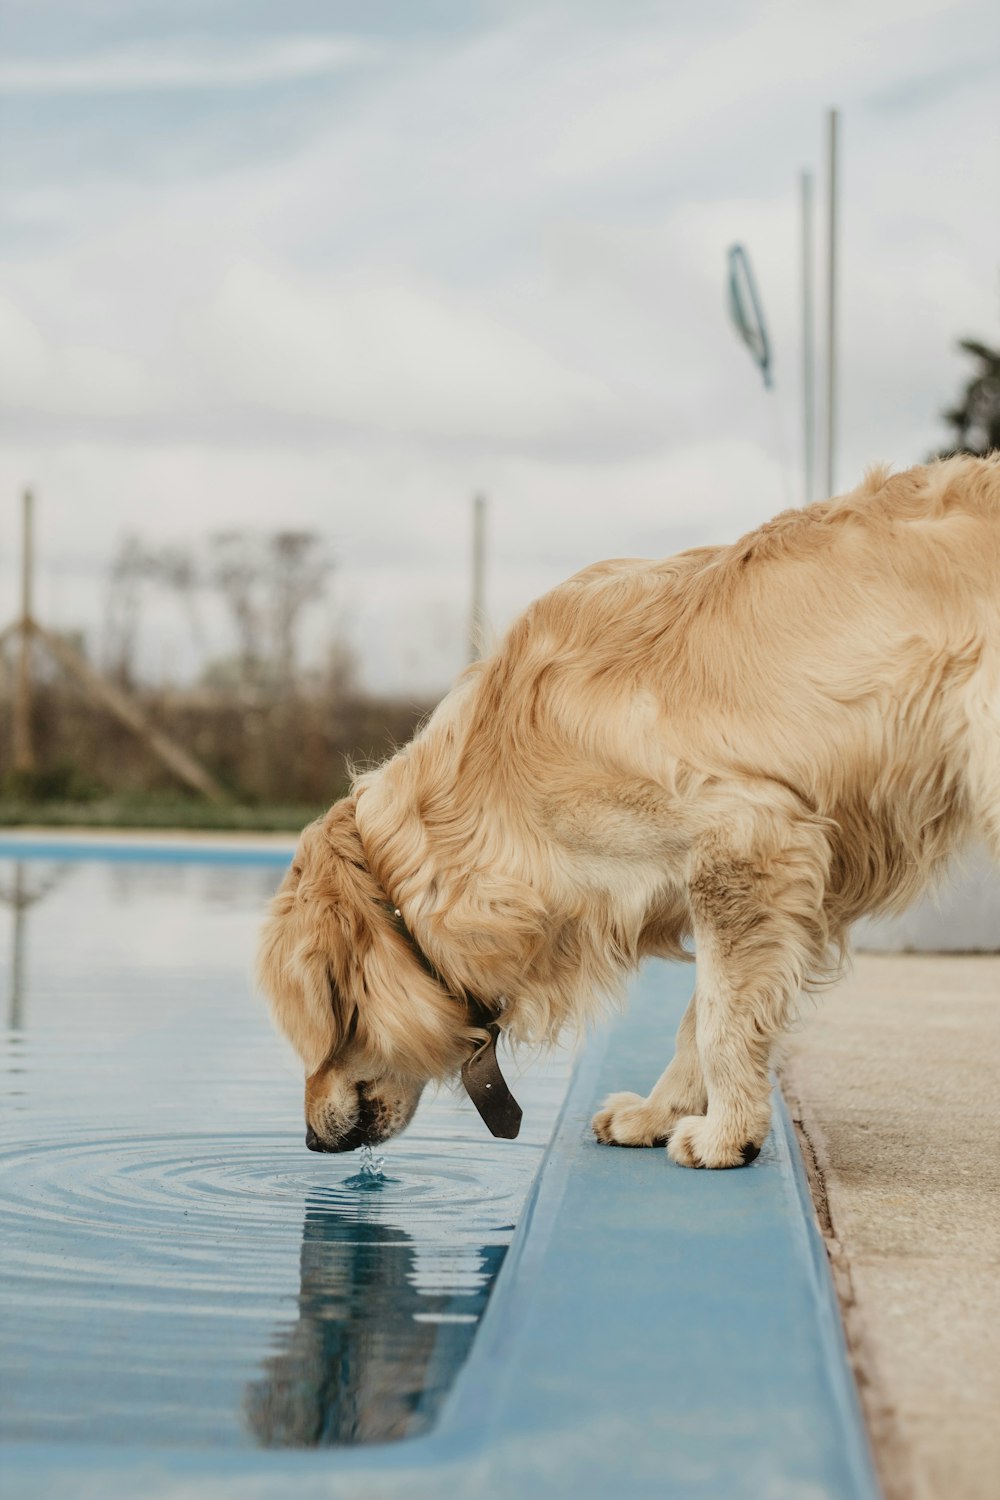 a dog drinking water from a pool of water